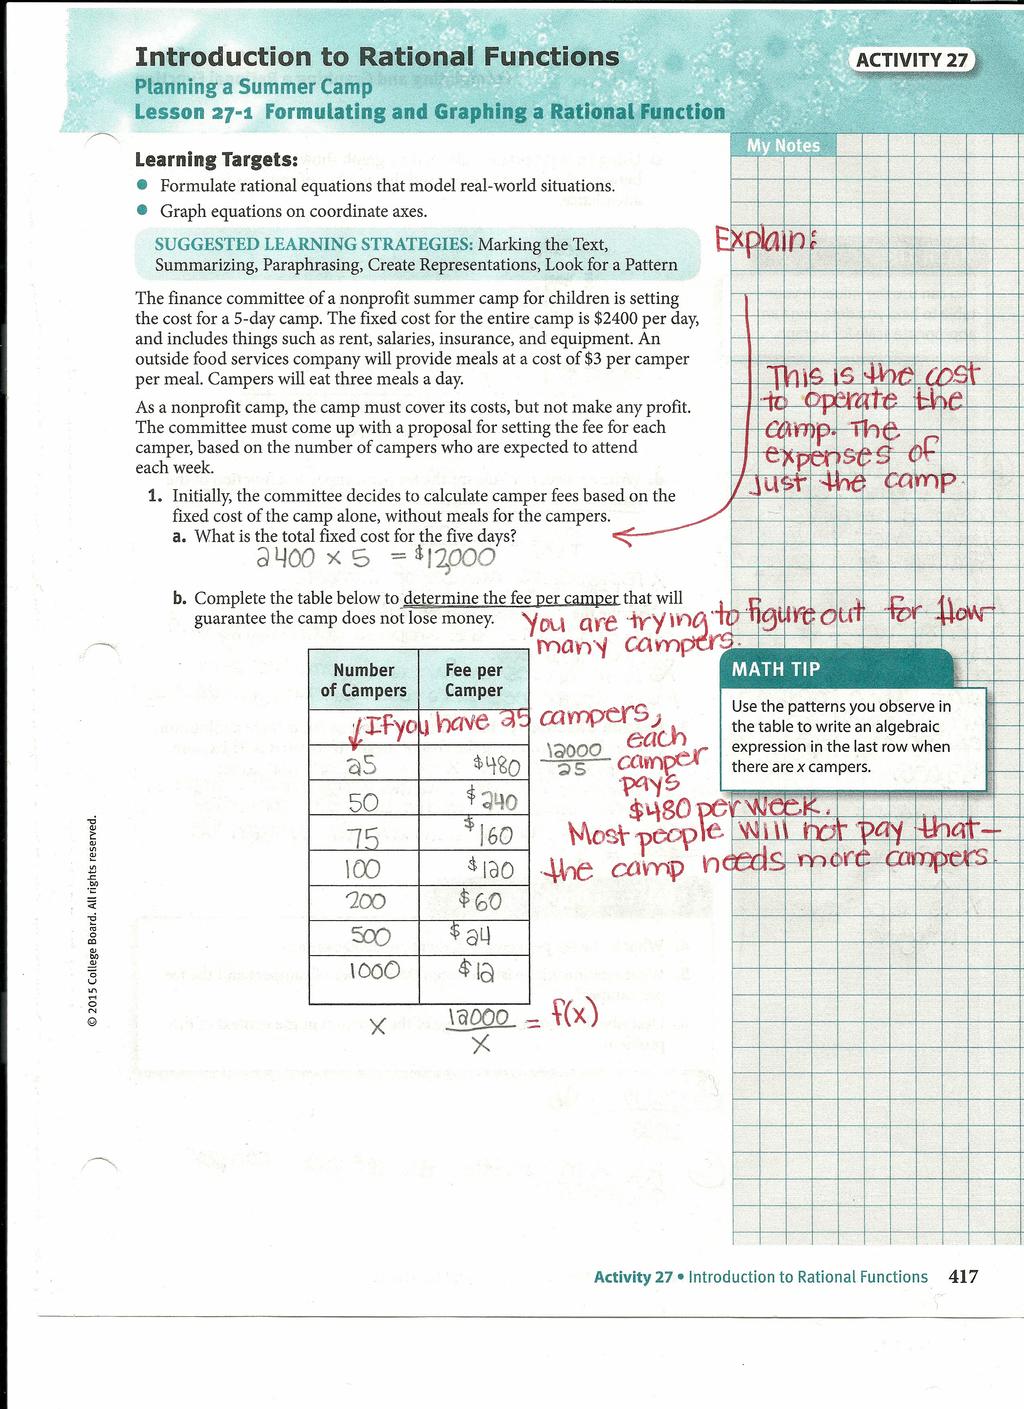 ntroduction to Rational Functions ACTVTY 27 Planning a Summer Camp Lesson 27-1 t Learning Targets: Formulate rational equations that model real-world situations Graph equations on coordinate axes The